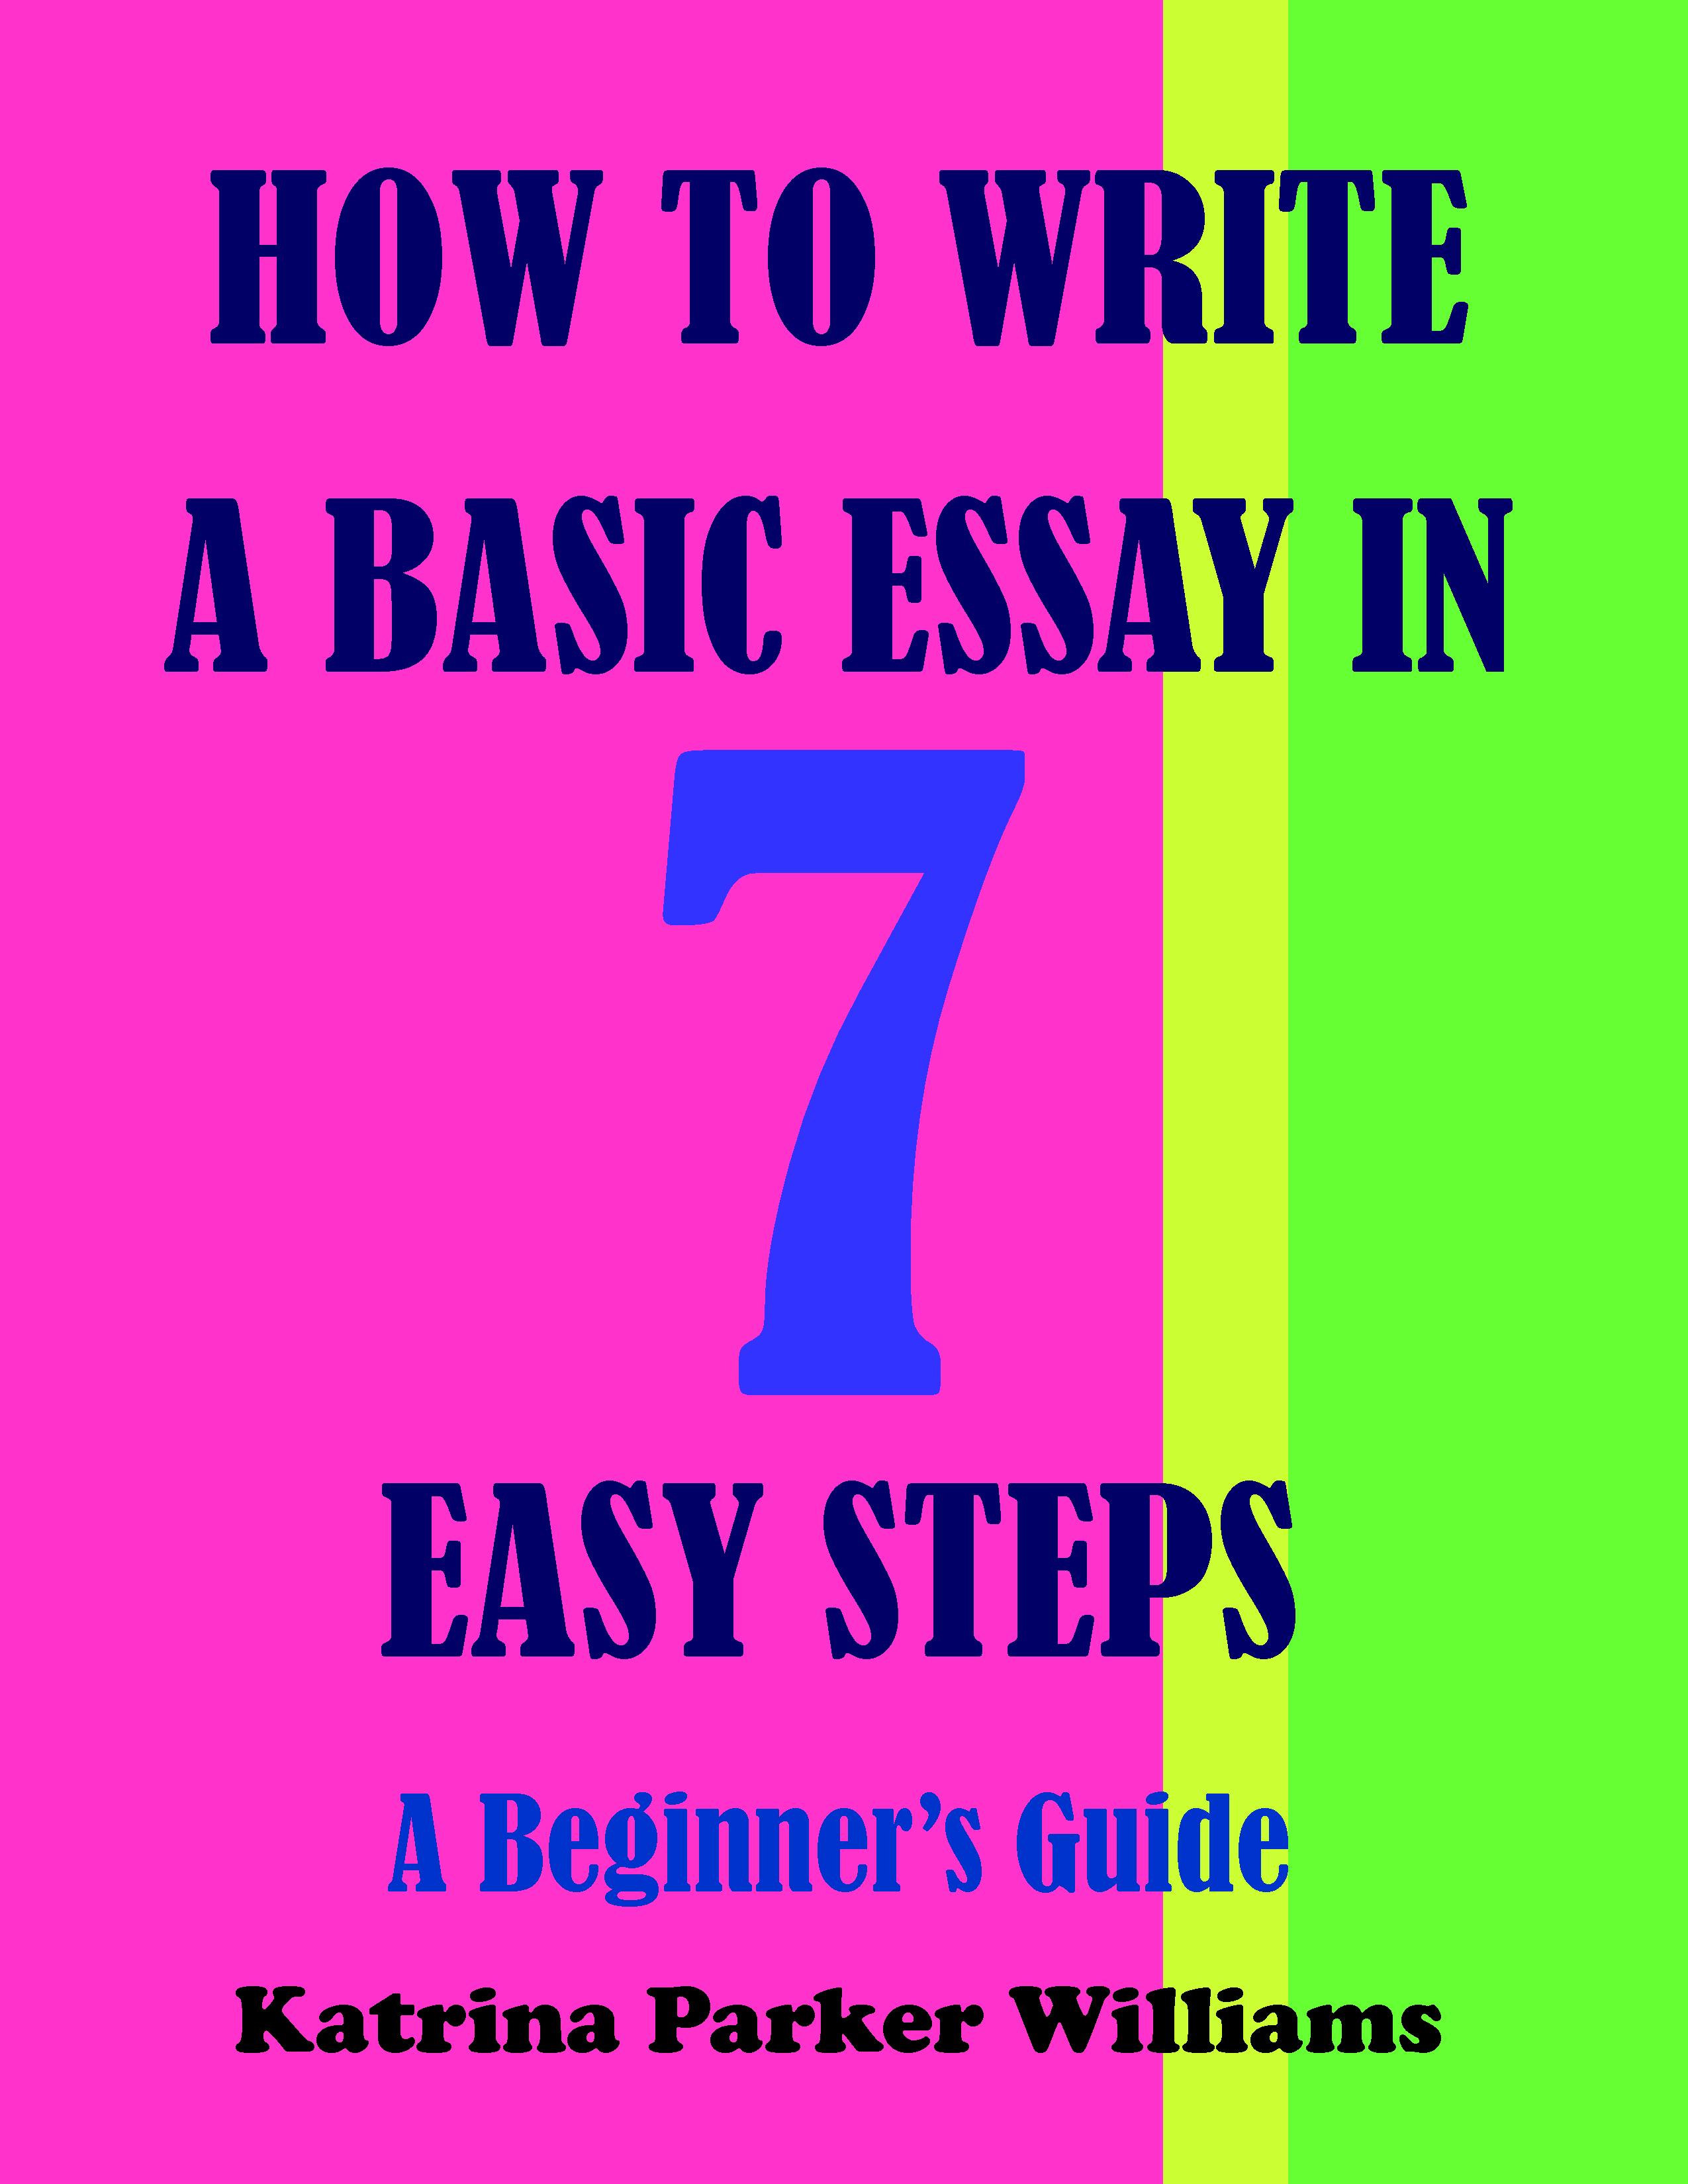 The Simplest Way to Write an Essay